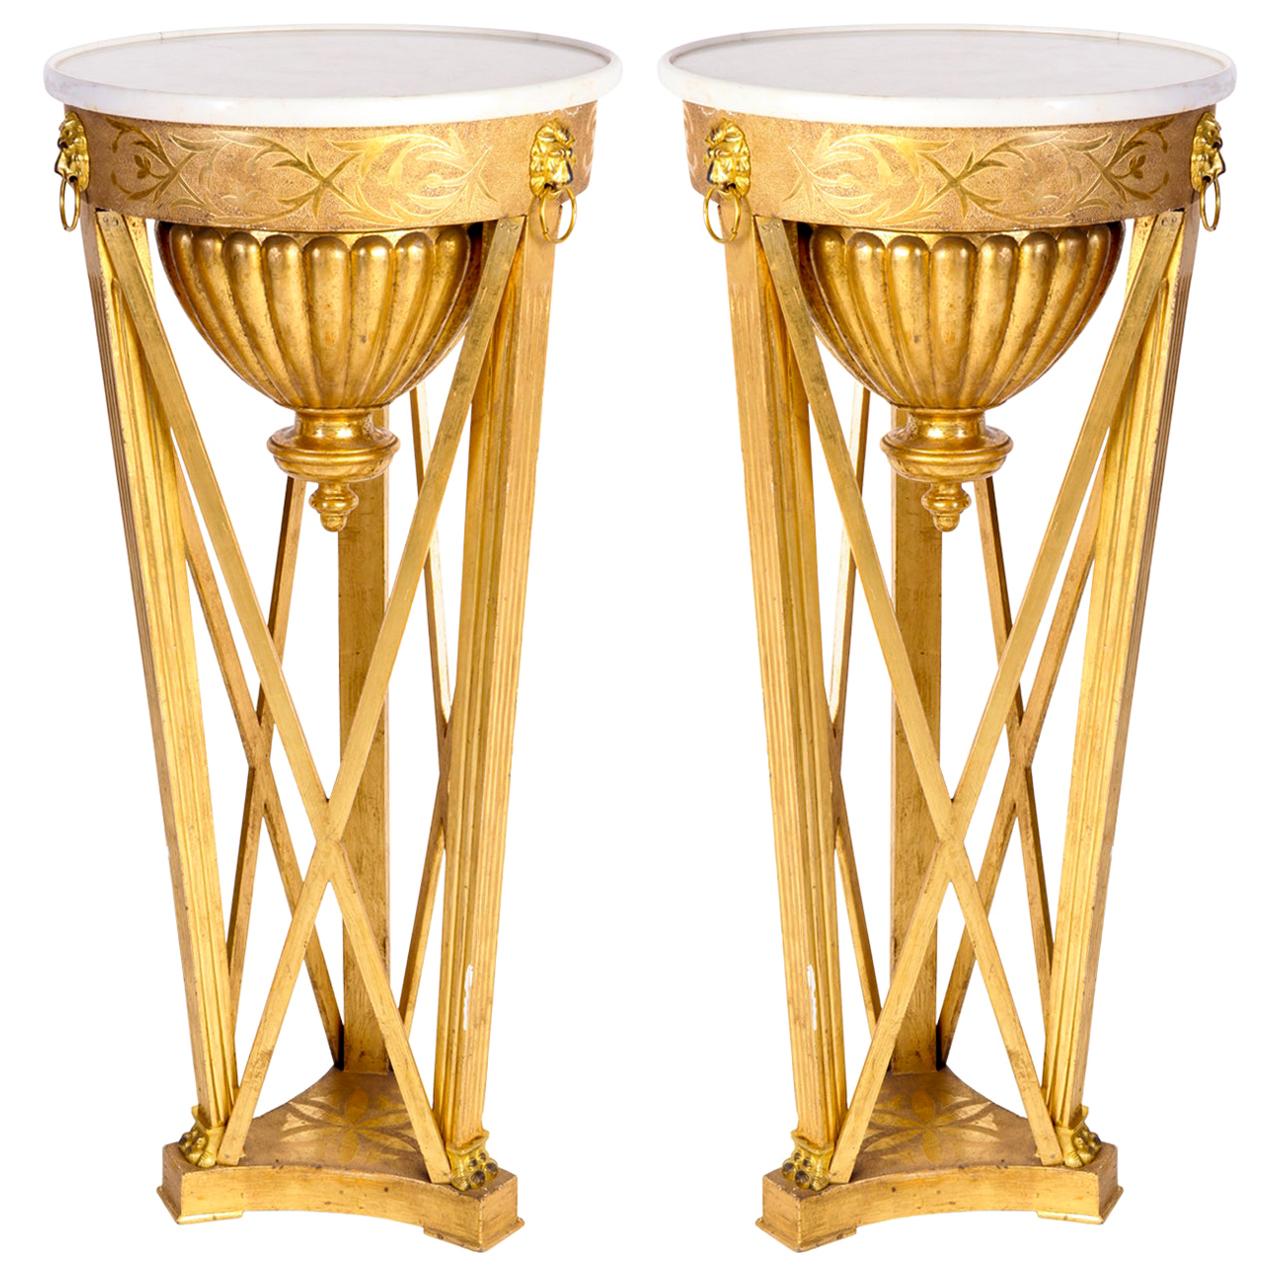 Very Fine Pair of Italian Neoclassical Guéridons or Side Tables Tuscany, 1830 For Sale